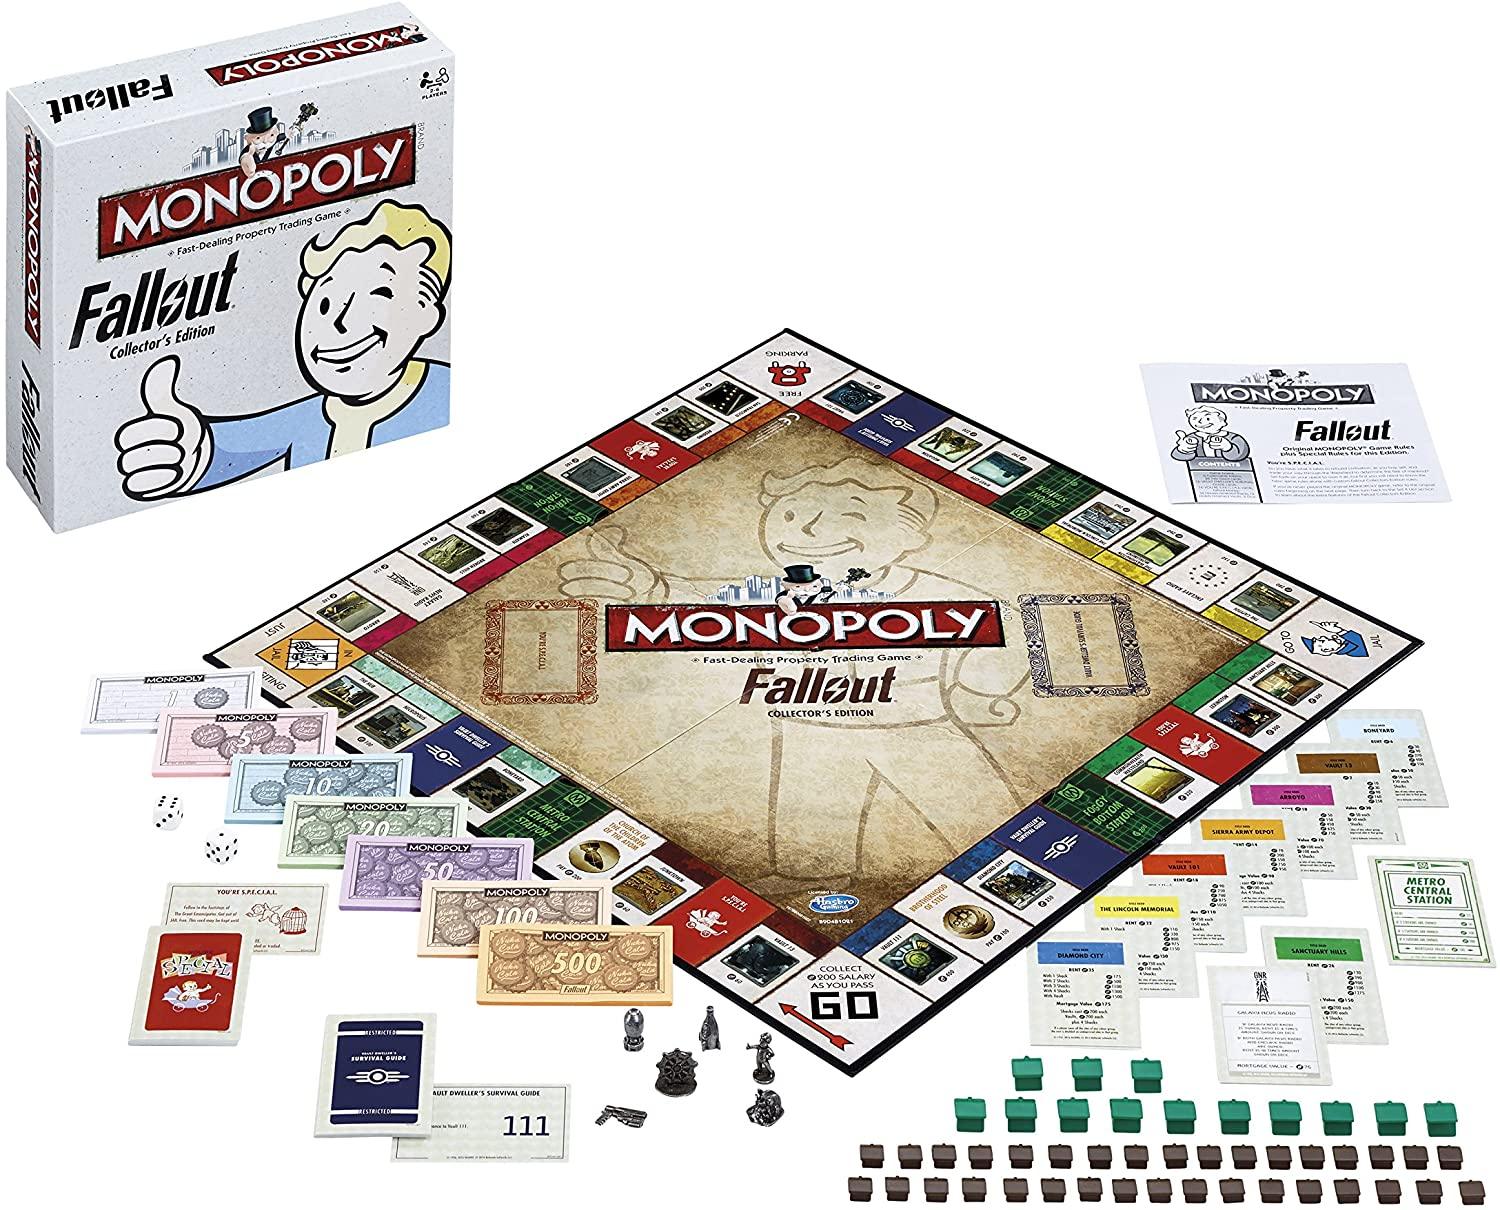 Monopoly : Fallout Collector's Edition - GameStore.mt | Powered by Flutisat